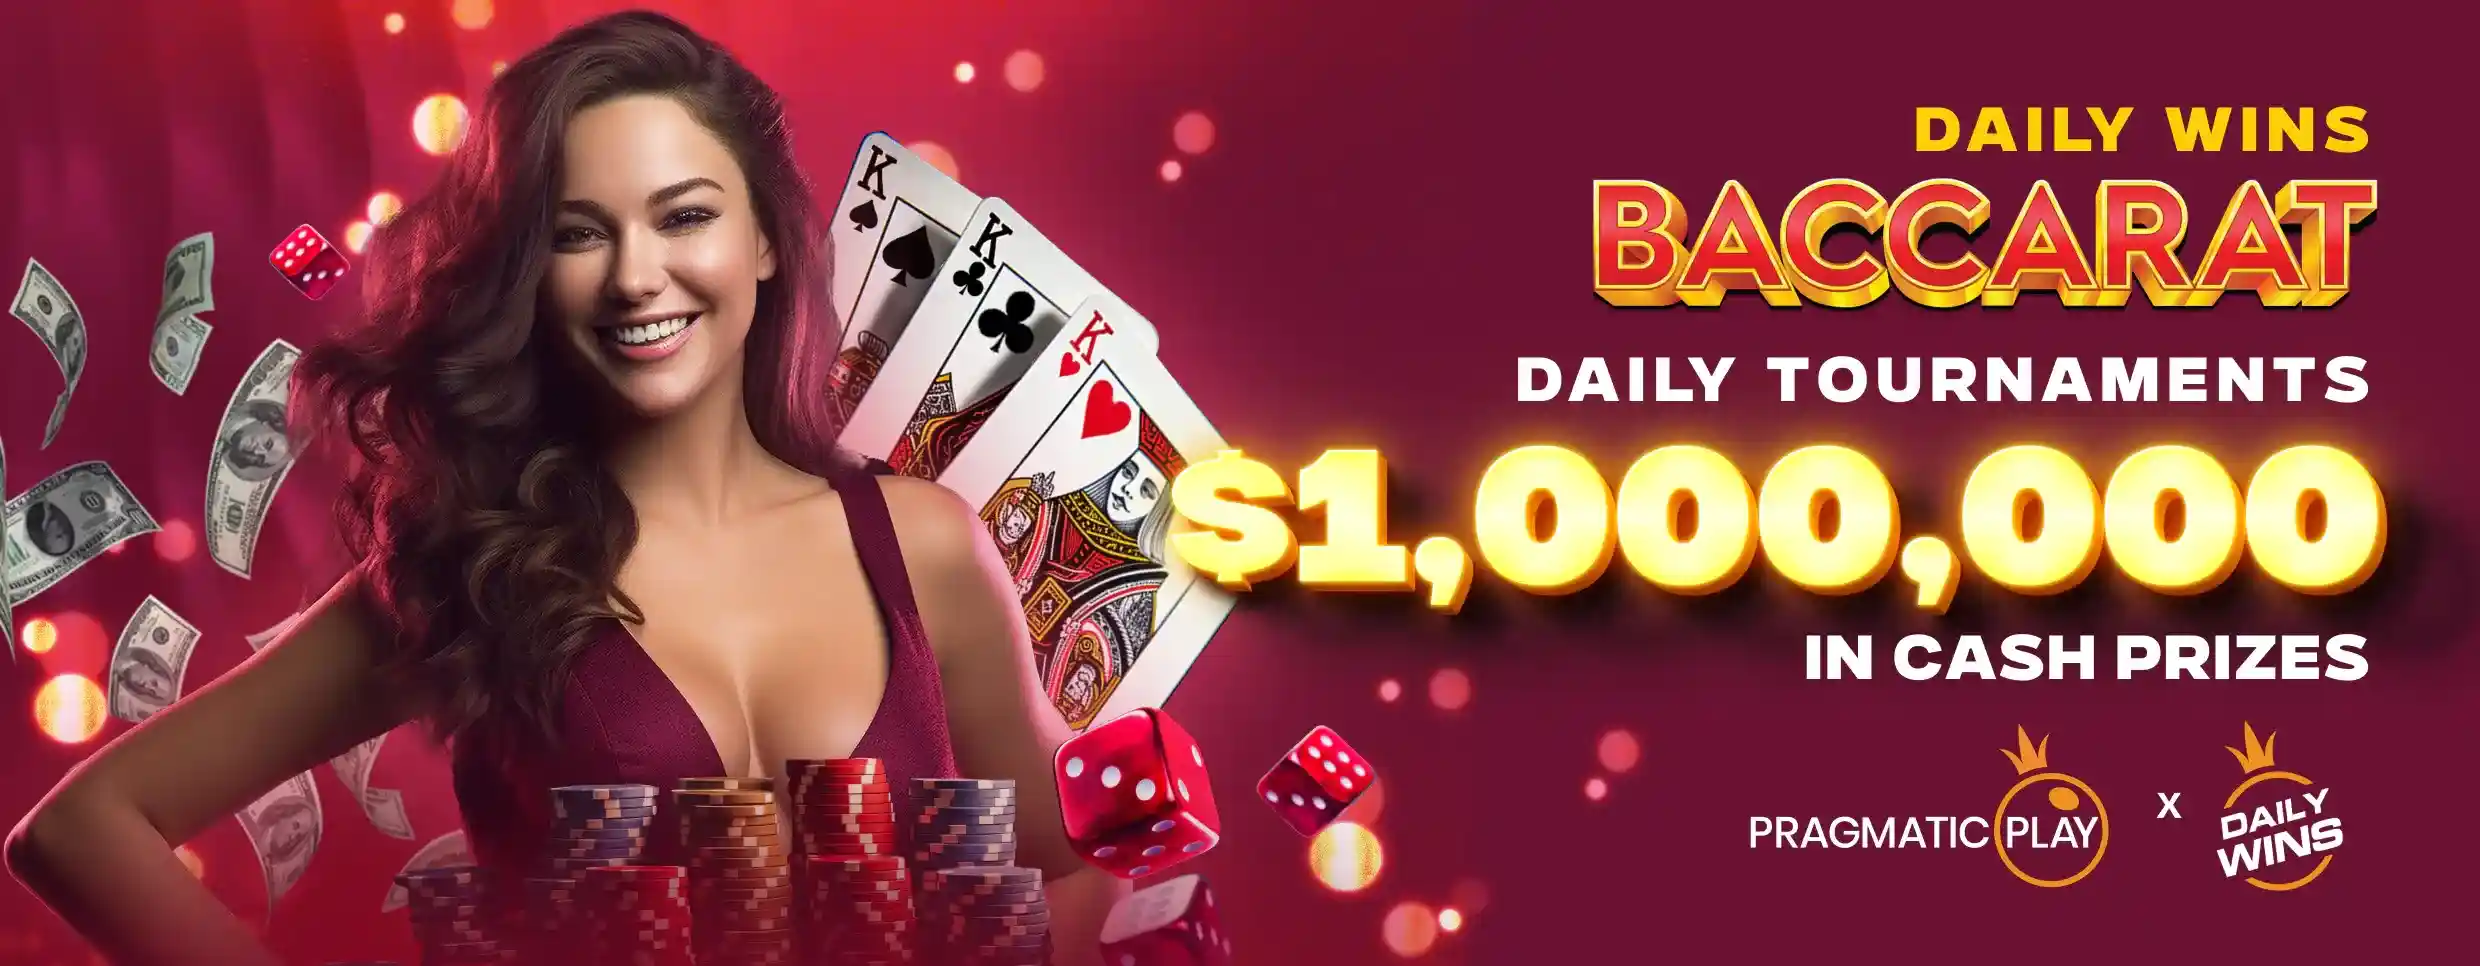 Daily Wins Baccarat Level 11